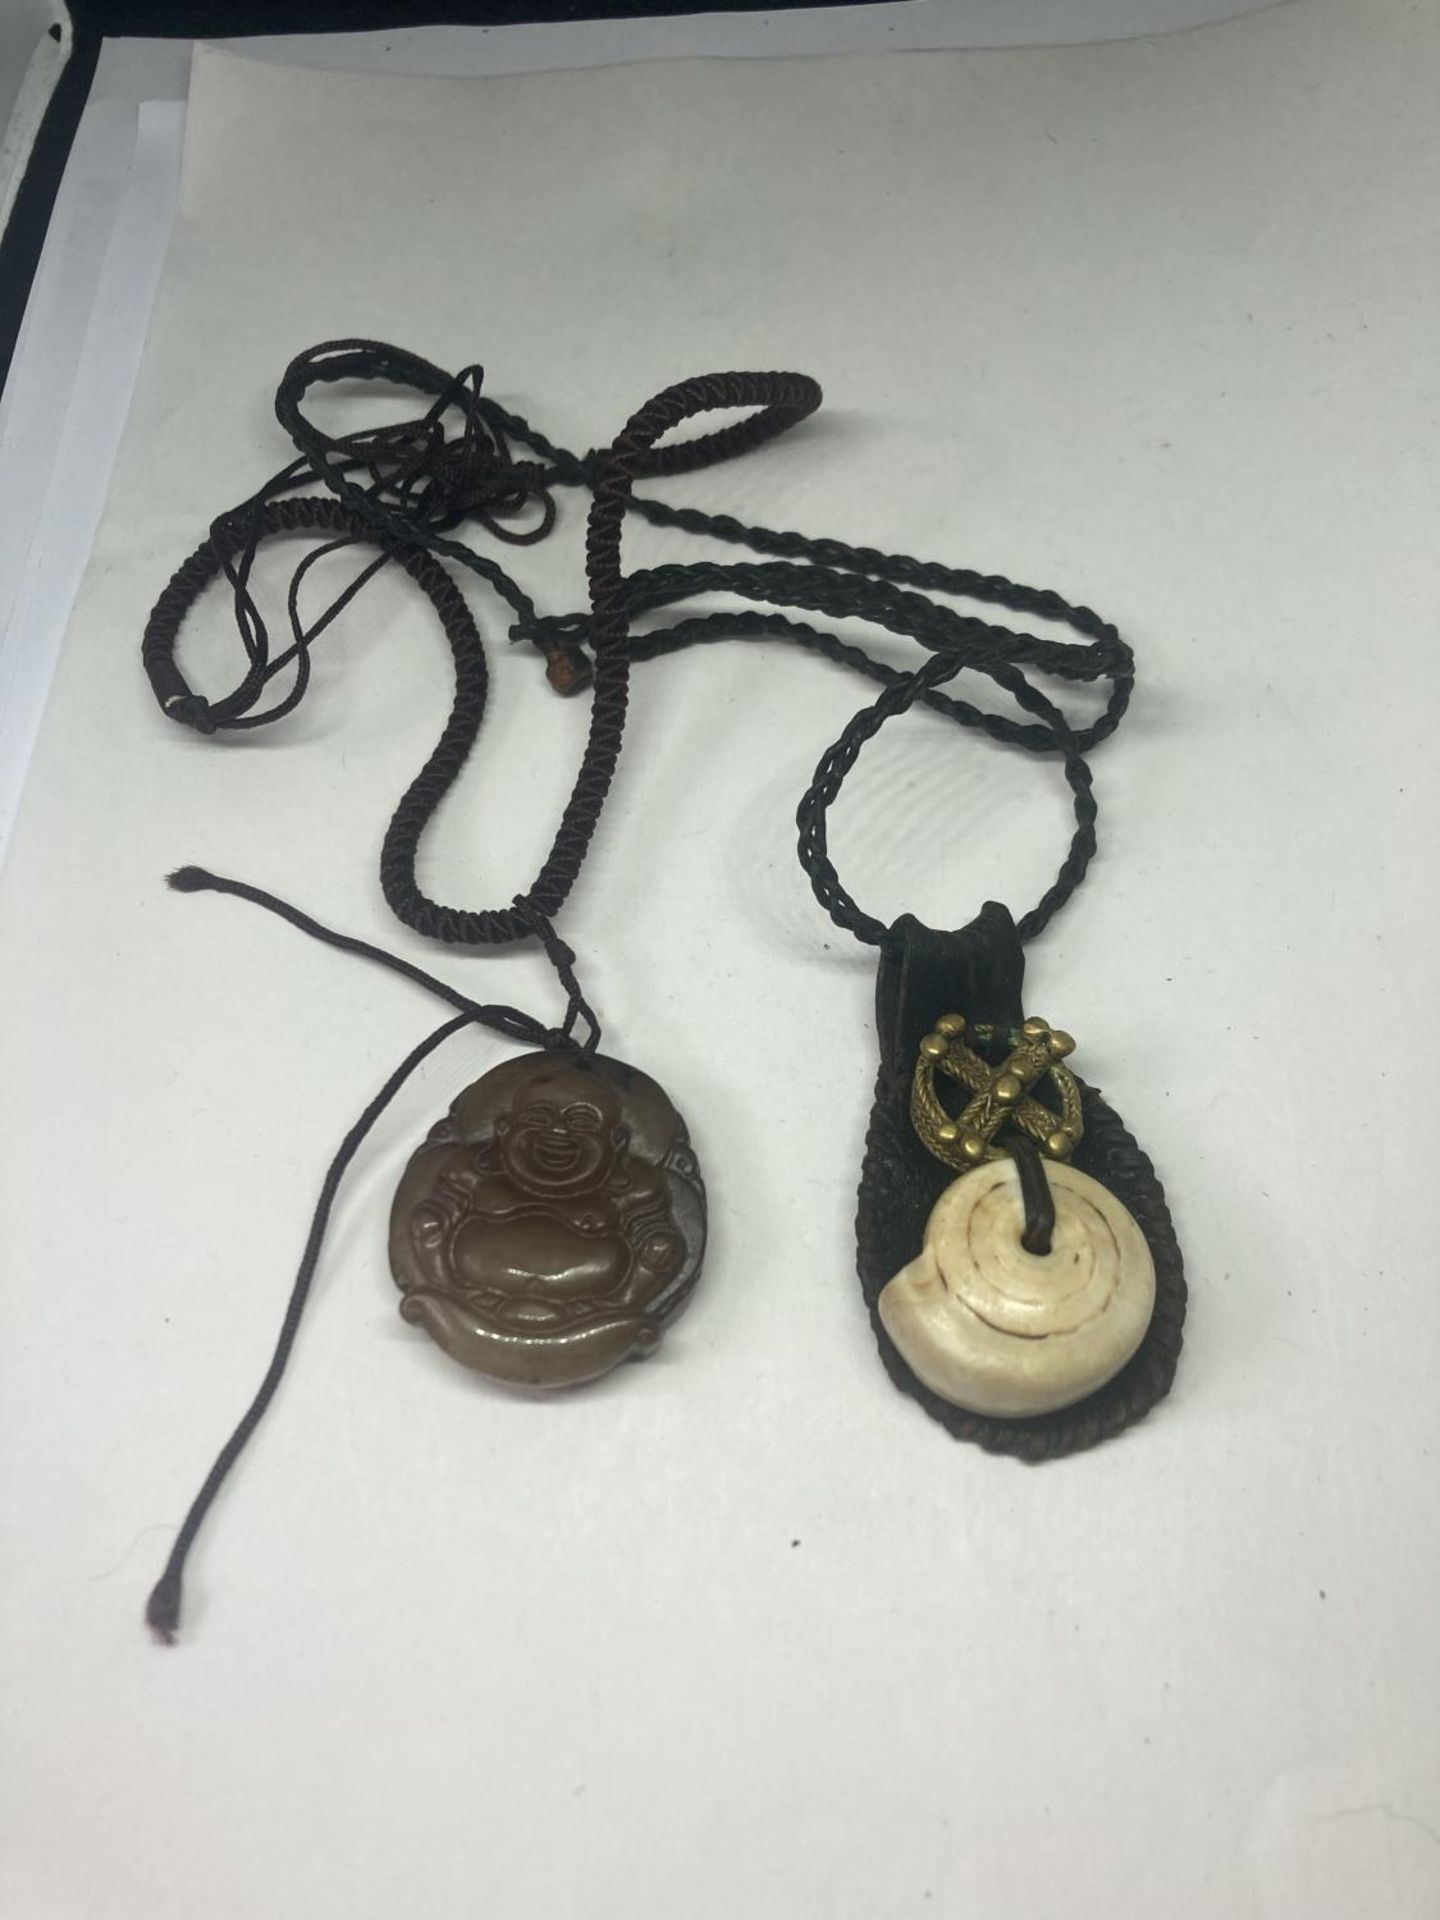 TWO NECKLACES TO INCLUDE A CARVED BUDDHA PENDANT AND A TALISMAN GOOD LUCK AMULET BOTH ON A LEATHER - Image 2 of 8